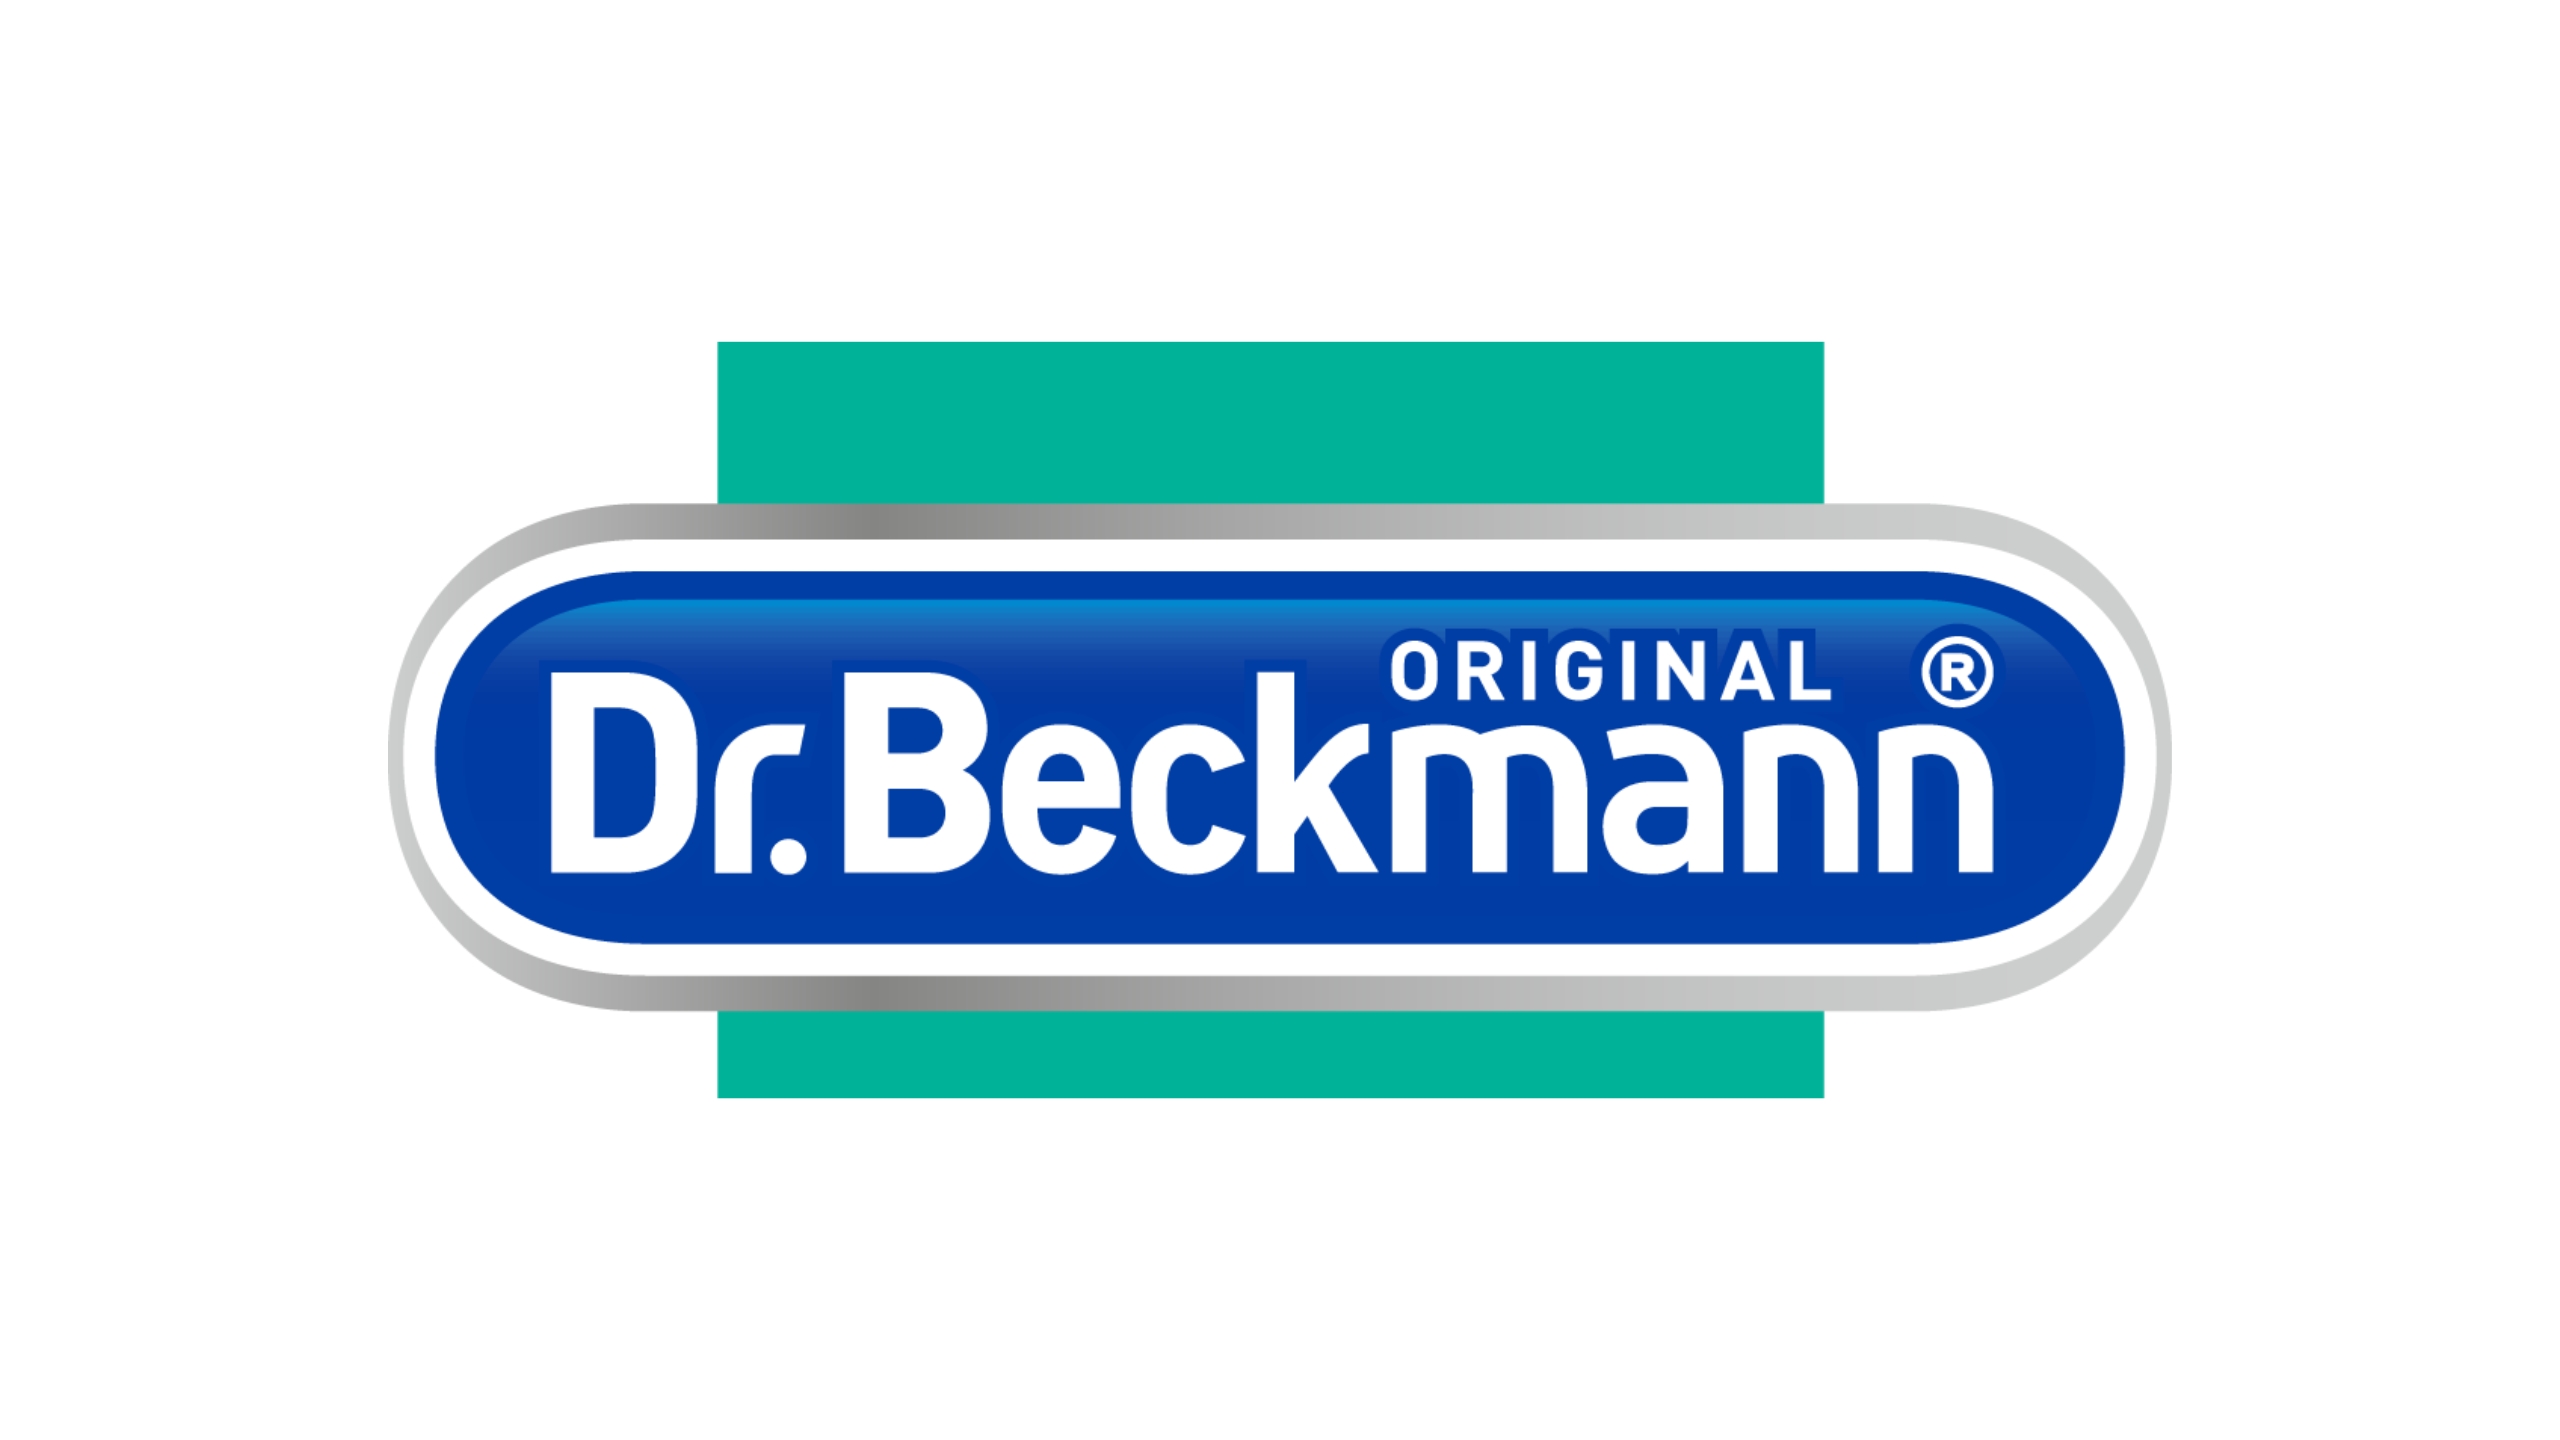 Dr Beckmann Stain Devils - Fat & Sauces 50ml - CPD Direct